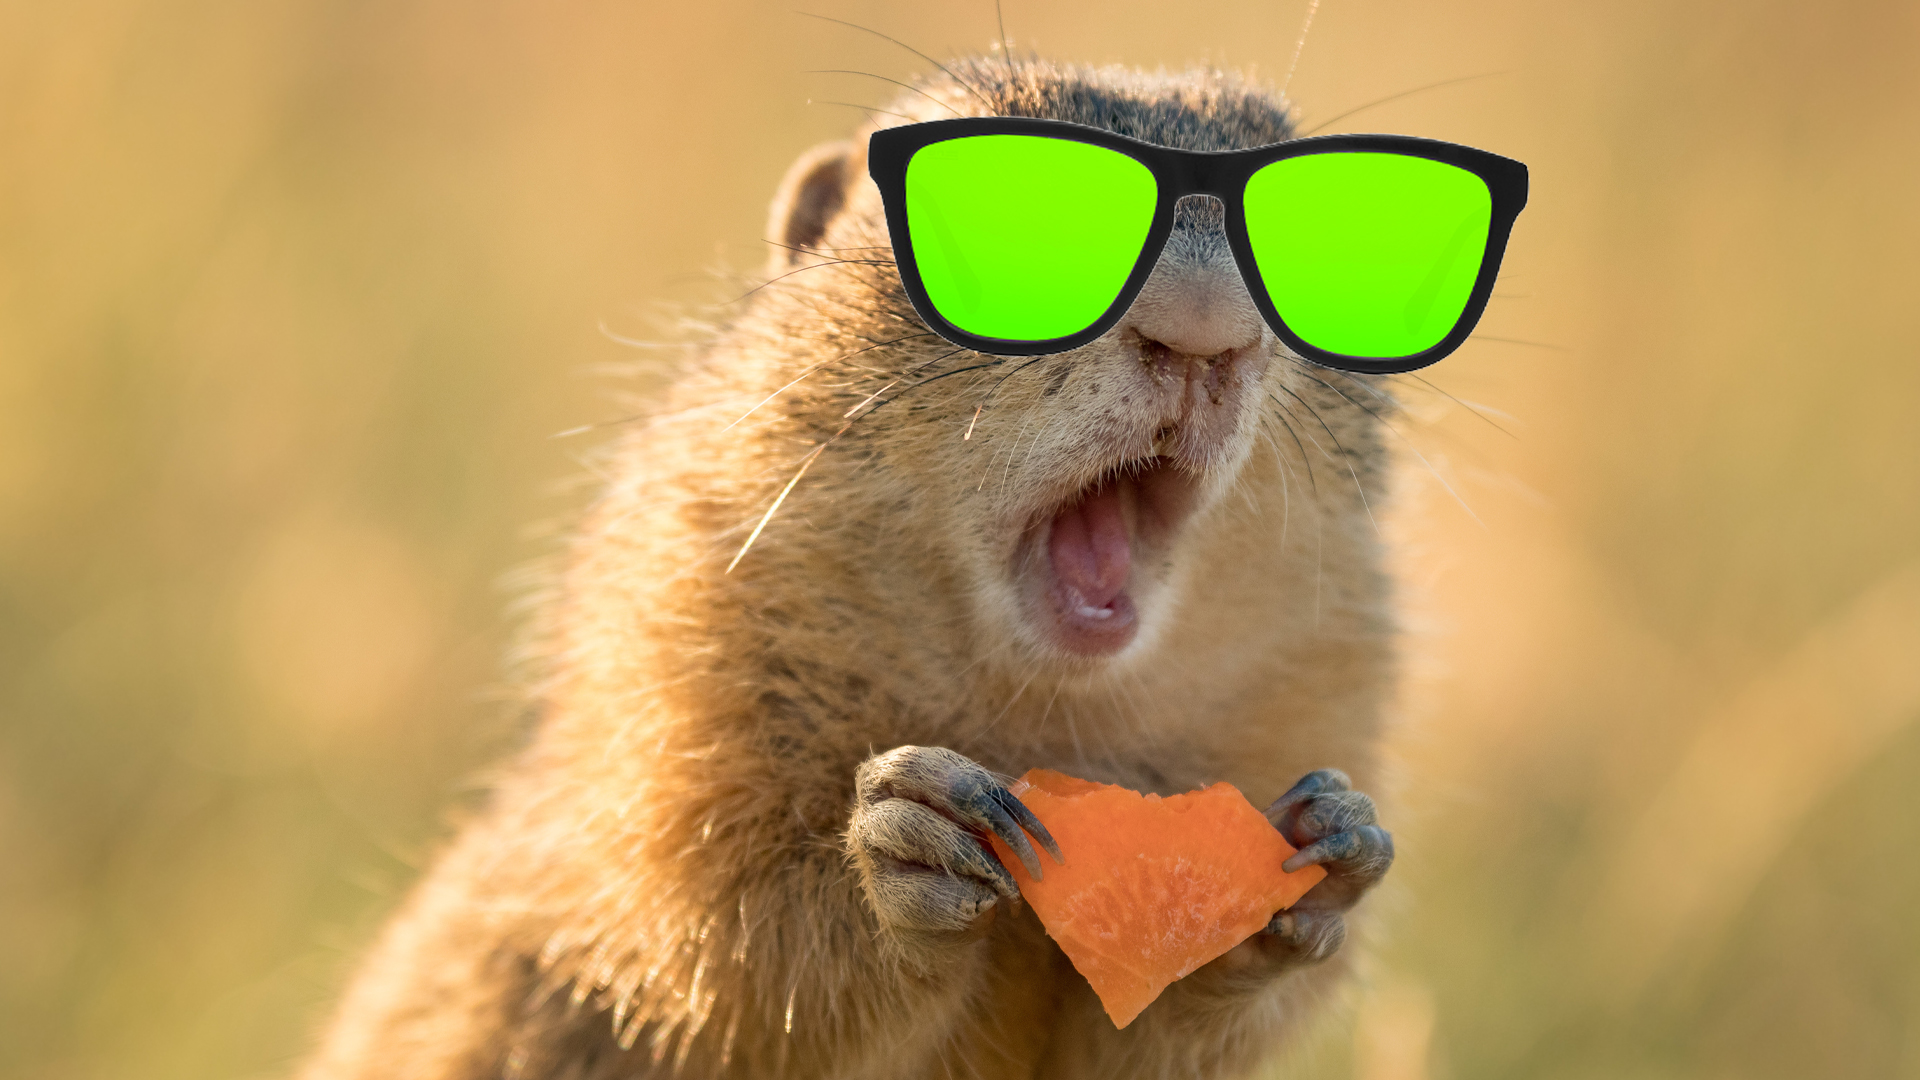 A surprised squirrel wearing sunglasses 